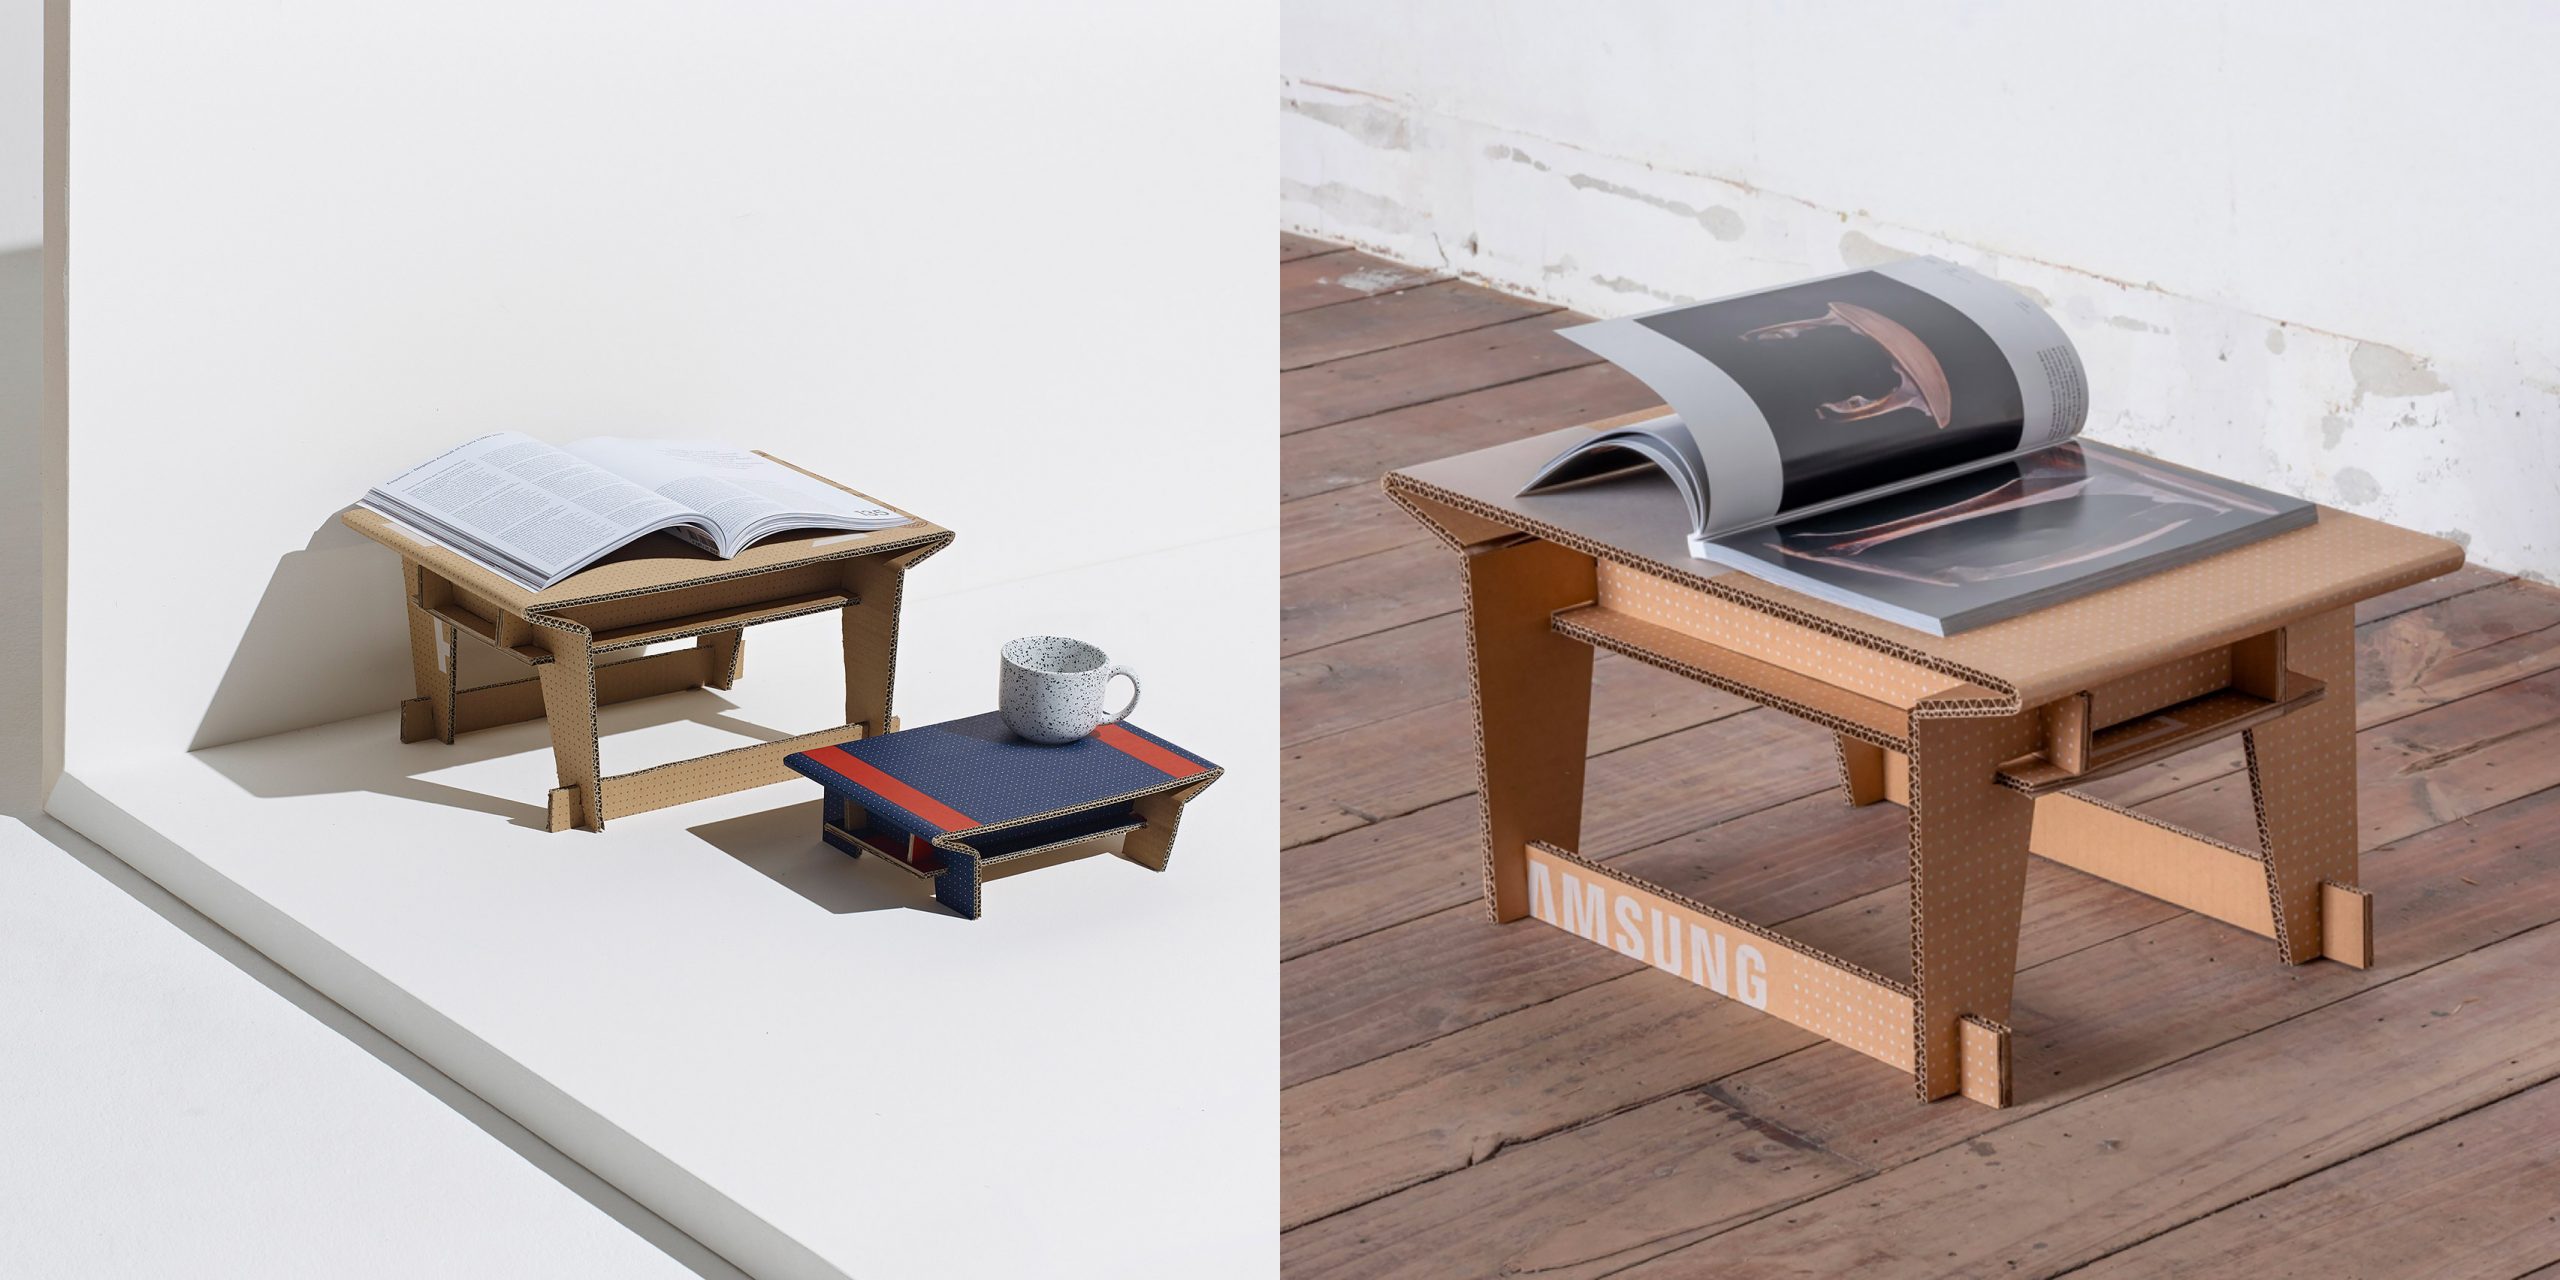 The Soban tables by beFormative